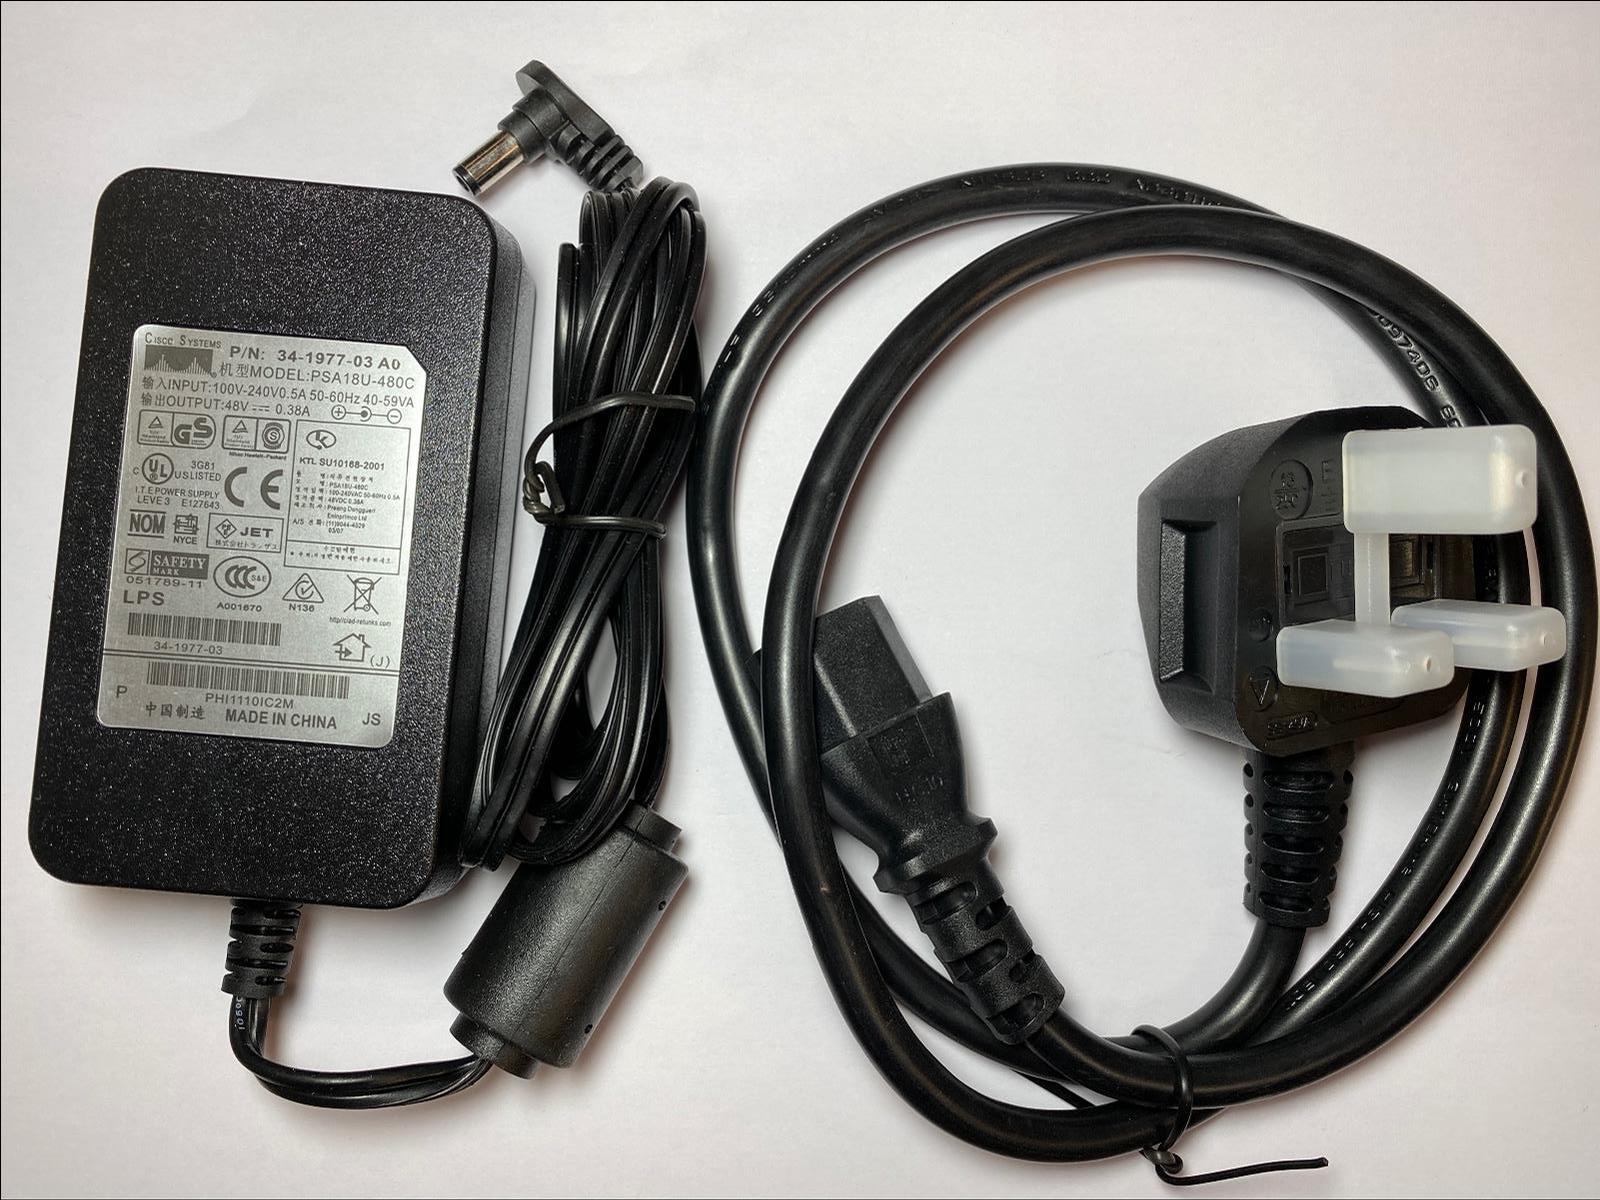 48V AC/DC Adapter Replacement for Cisco Aironet 1700 2700 3700 3700i AIR-CAP3702I-A-K9 B-K9 R-K9 E-K9 AIR-LAP1142N-A-K9 AIR-CAP1702I-A-K9 B-K9 AIR-CAP2702I-A-K9 LAP1142 Access Point AP